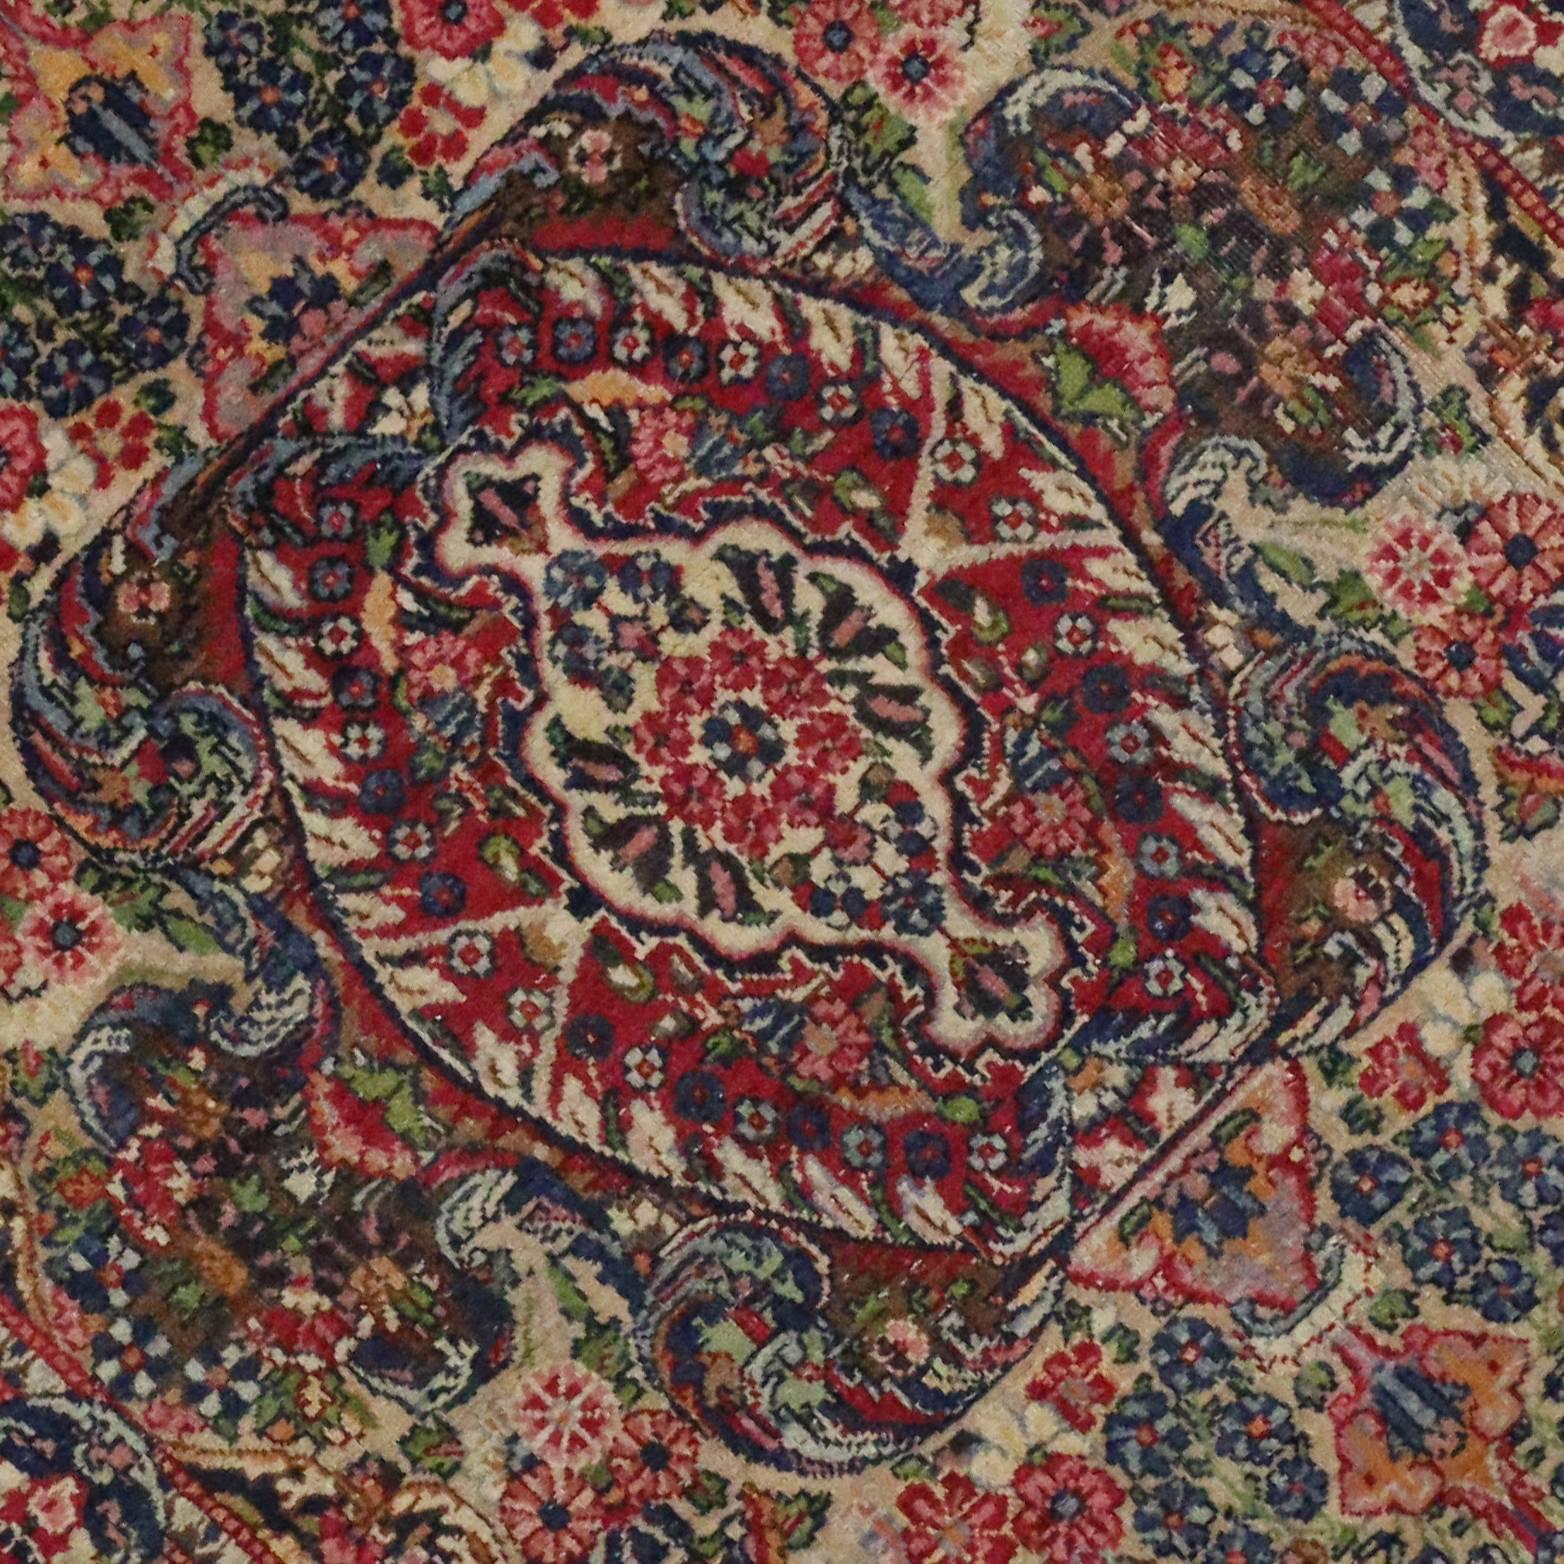 20th Century Antique Persian Kerman Rug with French Rococo Style, Small Persian Accent Rug